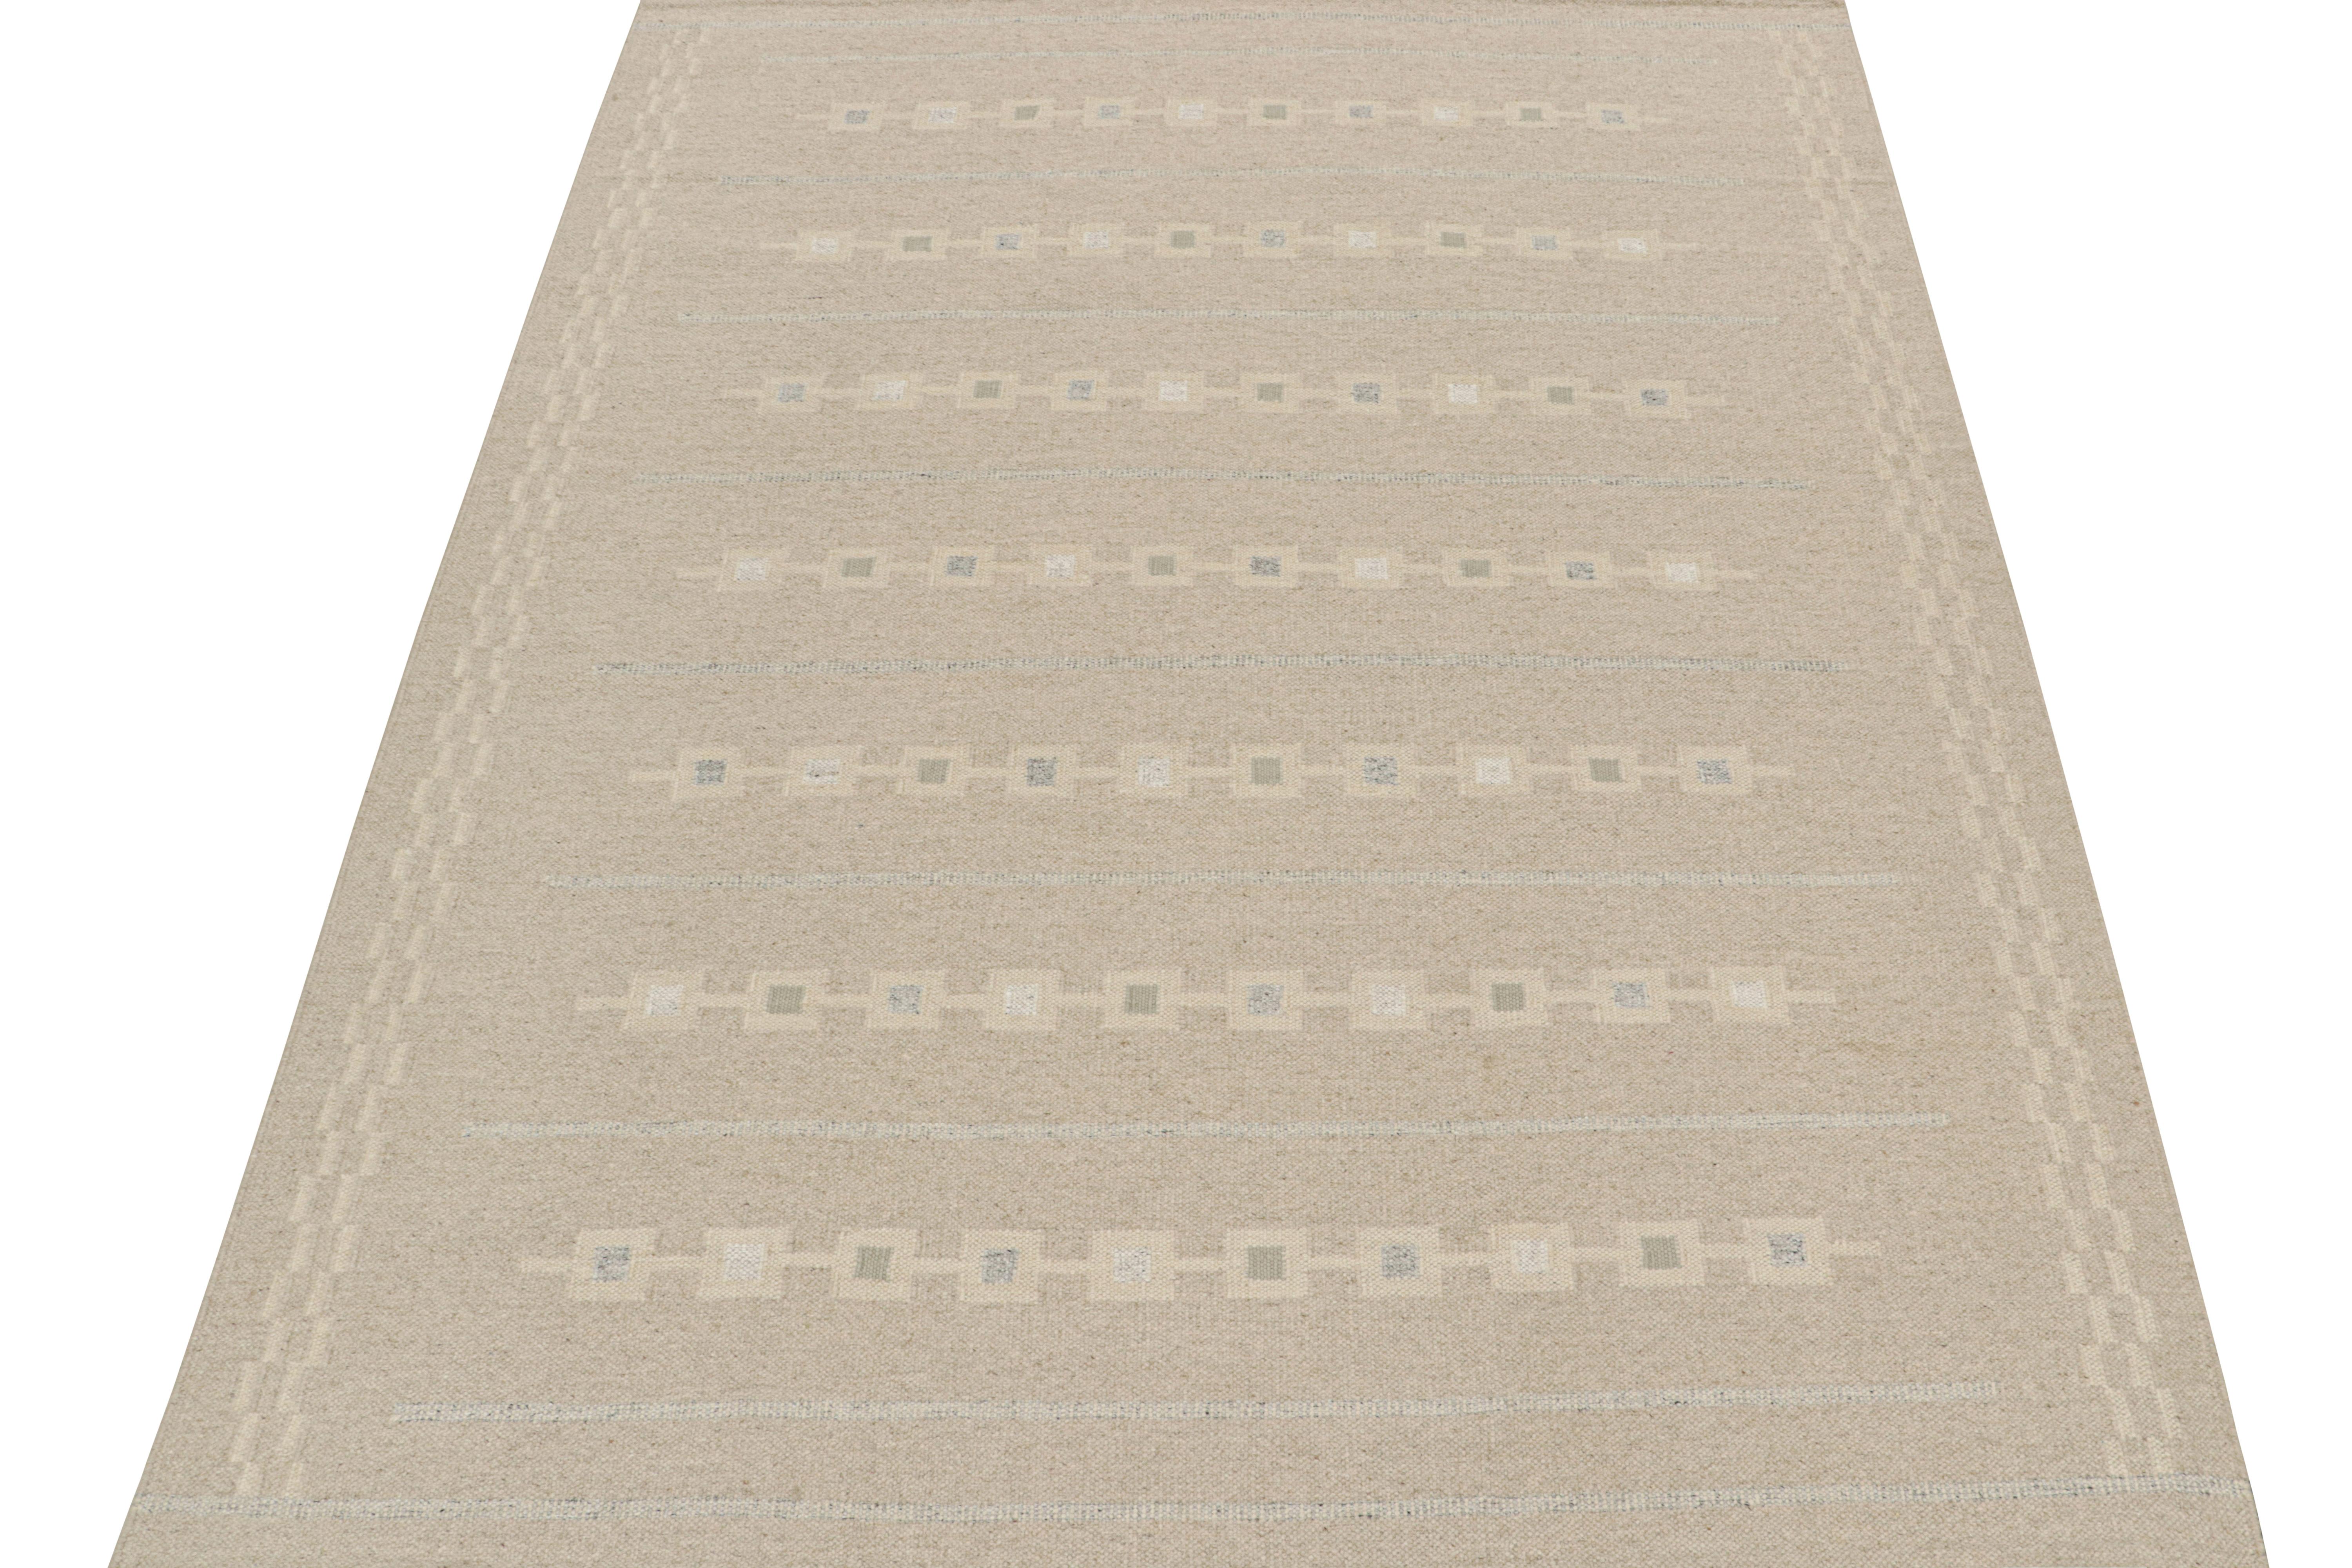 This 9x12 kilim is a new addition to the award-winning Scandinavian flat weave collection by Rug & Kilim. Handwoven in wool, its design is a bold modern take on minimalist Swedish Deco sensibilities in high-end quality.

Further on the